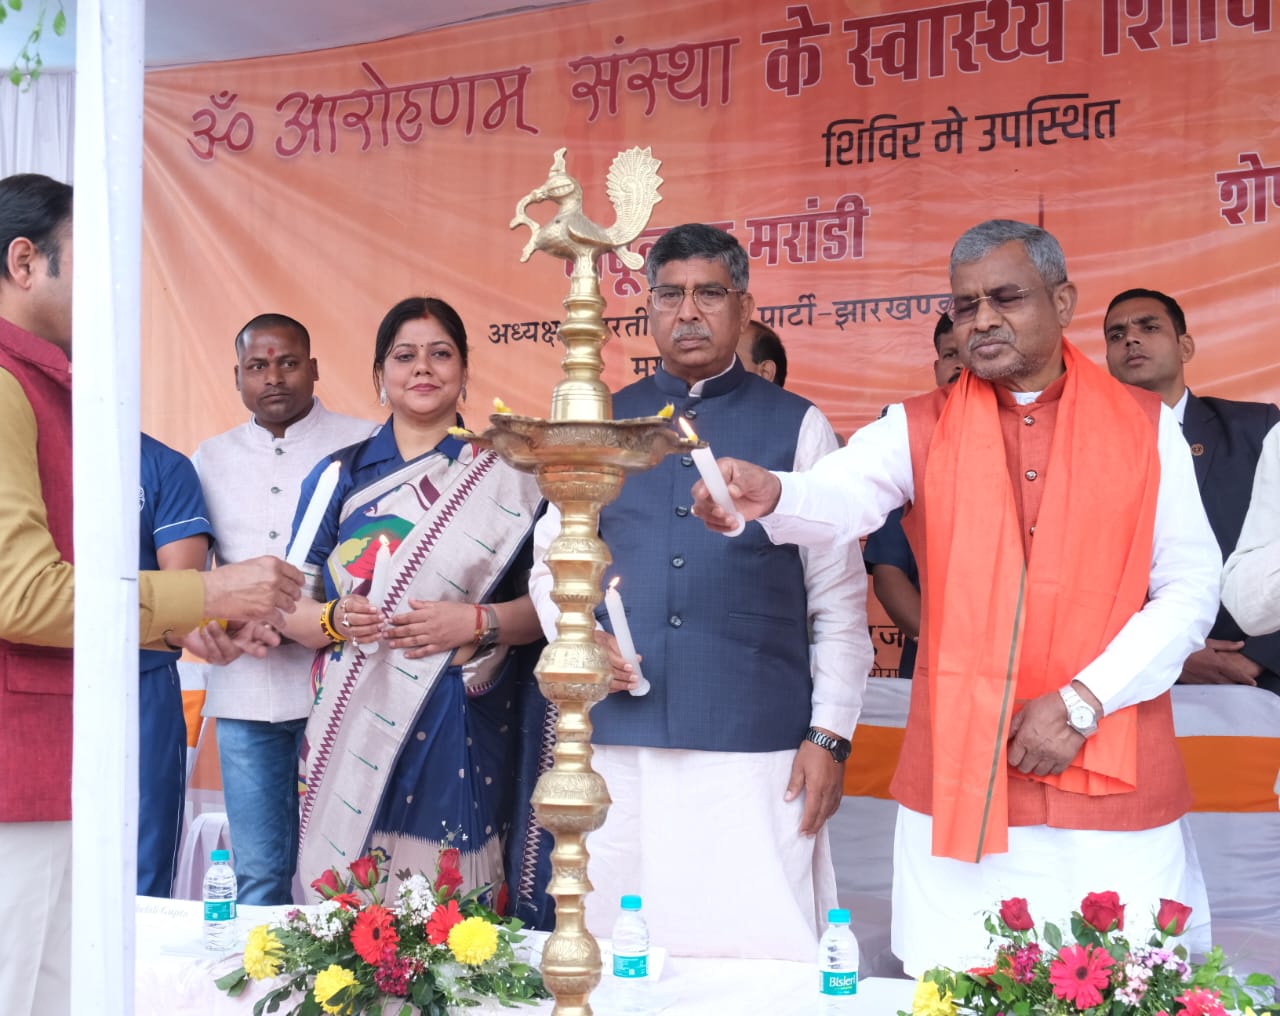 ranchi-free-checkup-of-2500-people-in-the-health-camp-organized-by-om-aarohanam-sanstha